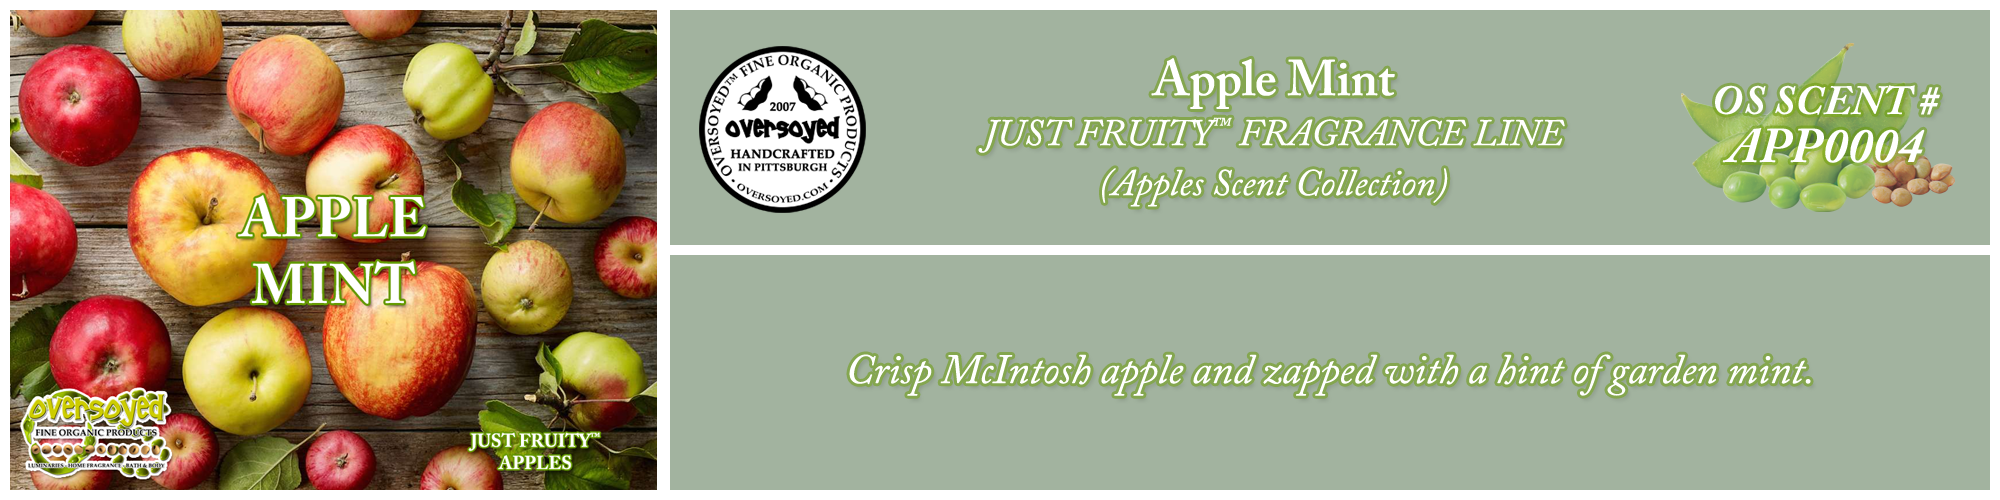 Apple Mint Handcrafted Products Collection